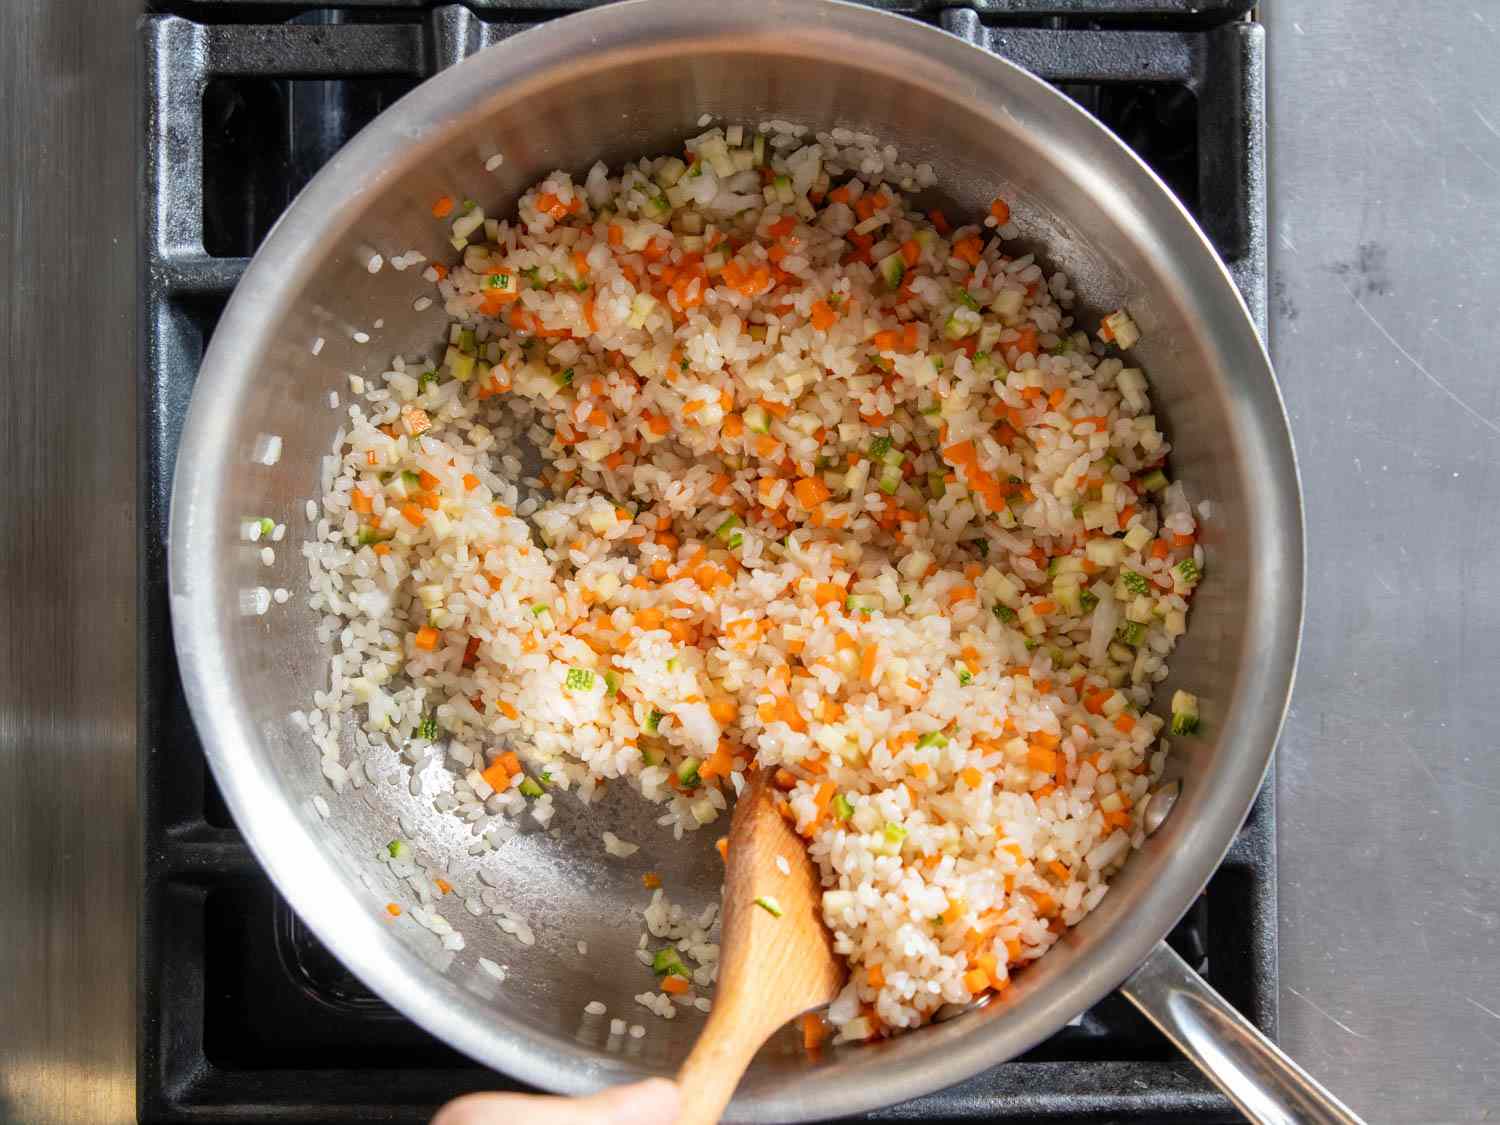 Mixing rice and finely minced vegetables together for Korean juk